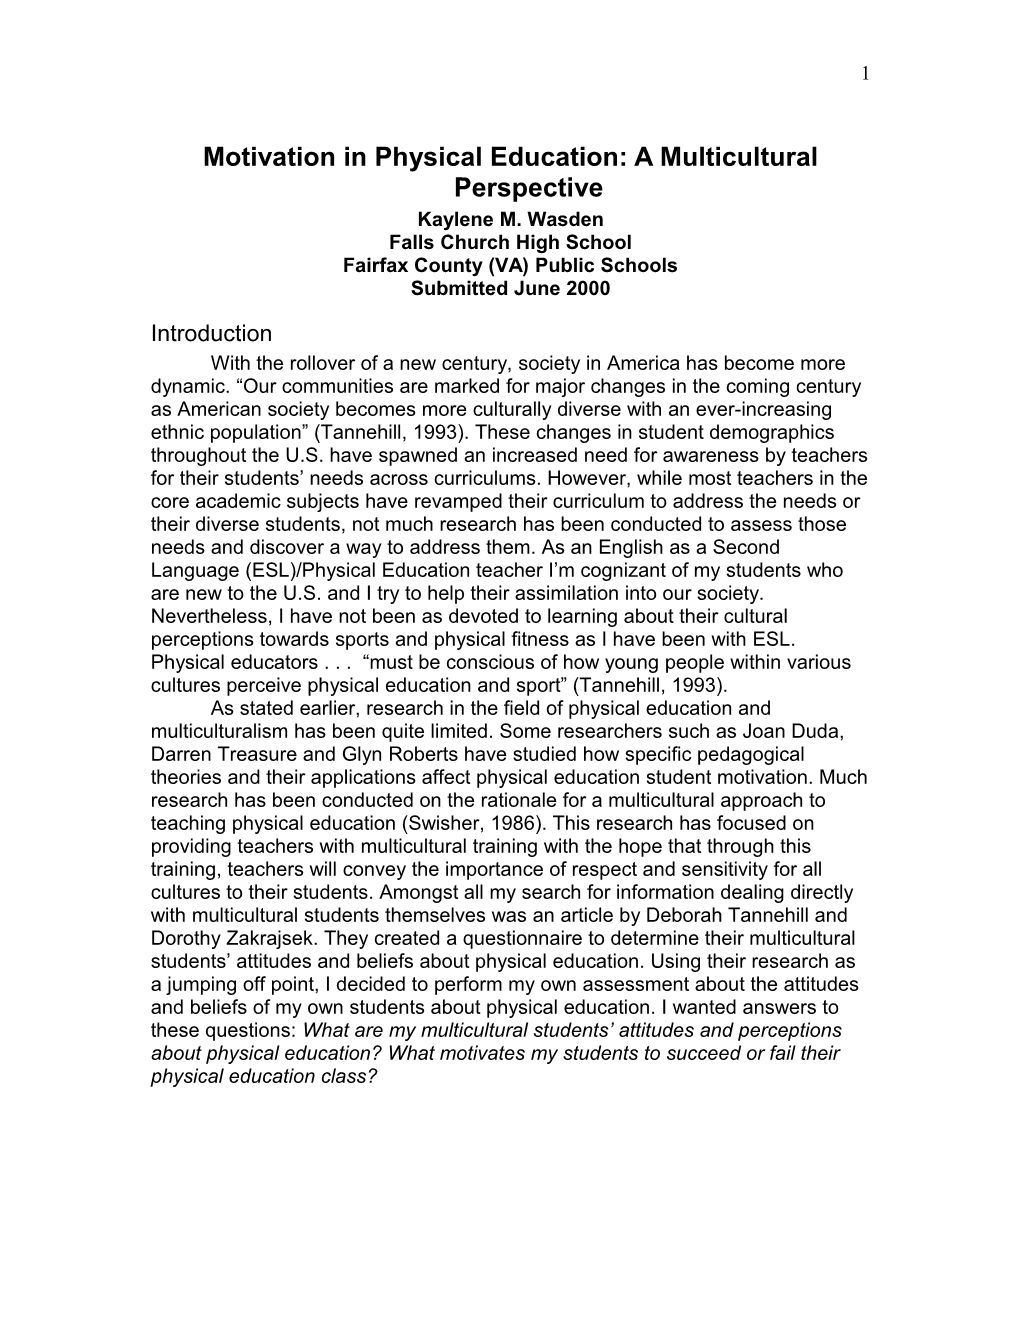 Motivation in Physical Education: a Multicultural Perspective